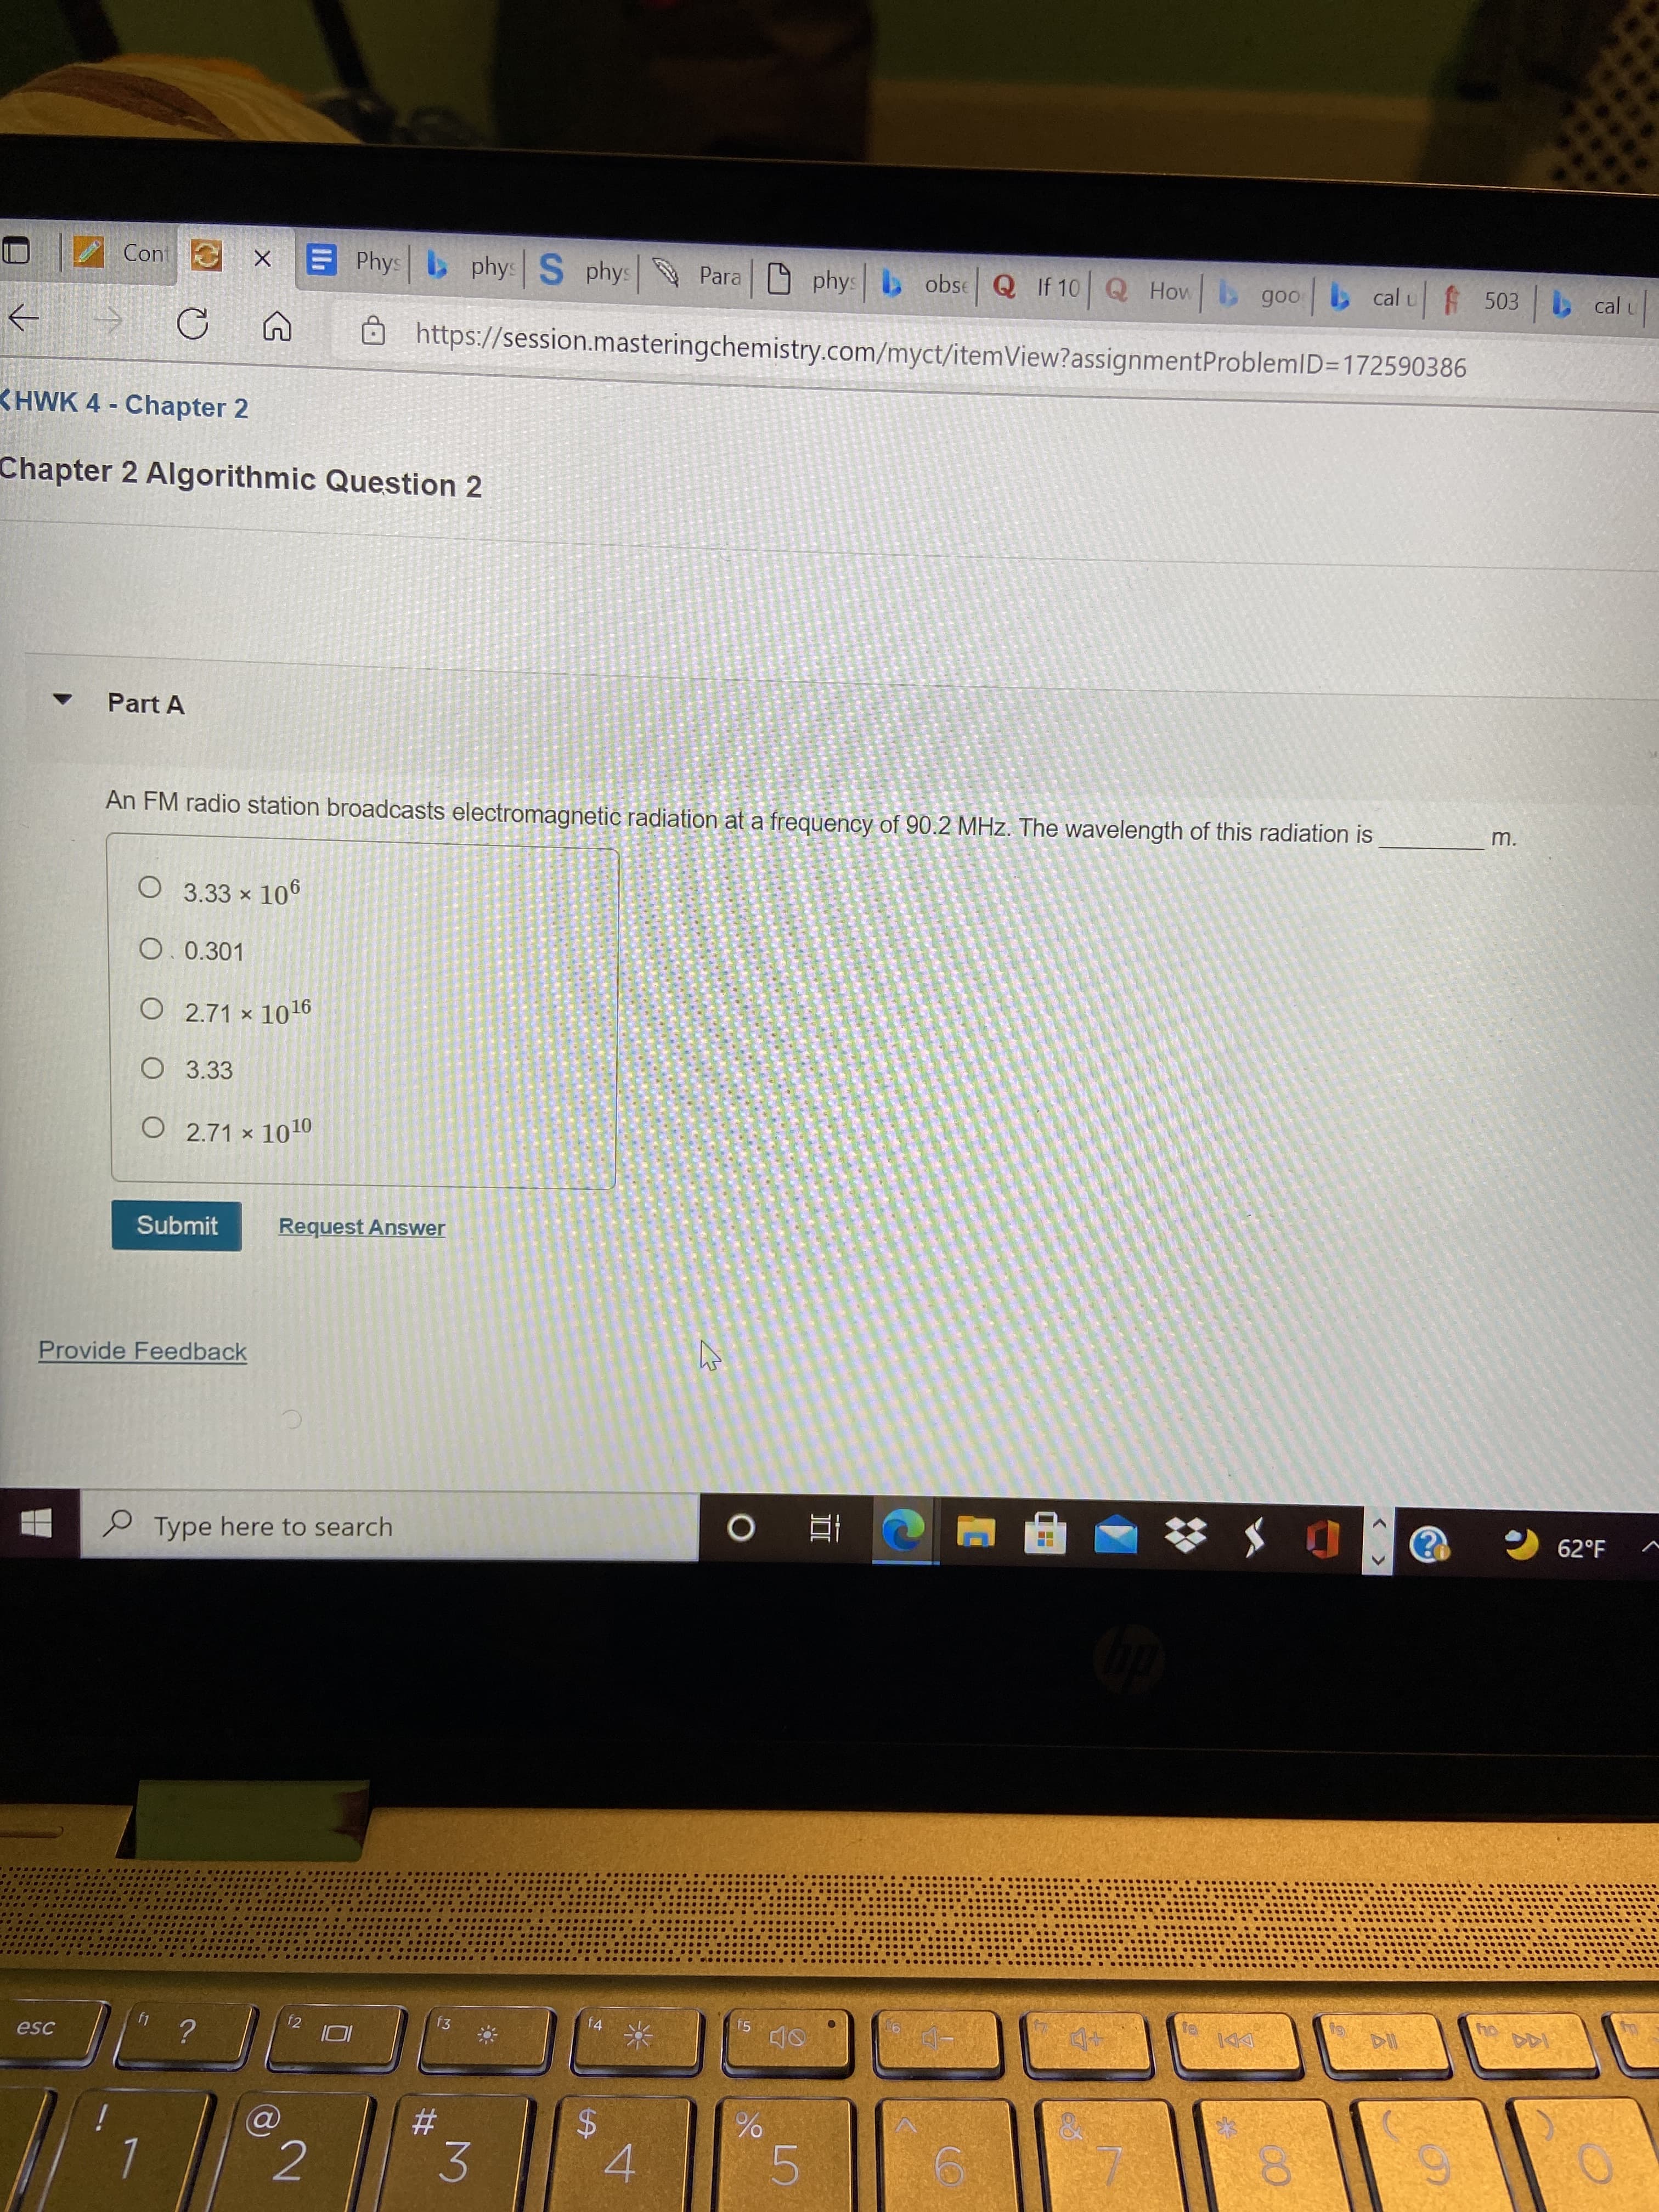 00
%24
Cont
EPhys phys S phys
Para phys b obse Q If 10 Q How goo
b cal u
cal u
https://session.masteringchemistry.com/myct/itemView?assignmentProblemlD=172590386
->
KHWK 4- Chapter 2
Chapter 2 Algorithmic Question 2
Part A
m.
An FM radio station broadcasts electromagnetic radiation at a frequency of 90.2 MHz. The wavelength of this radiation is
O 3.33 x 106
O. 0.301
O 2.71 × 1016
O 3.33
O 2.71 × 1010
Submit
Request Answer
Provide Feedback
62°F
P Type here to search
|直0
f5
144
f4
" ?
f3
DDI
f2
esc
2
4.
5
3.
